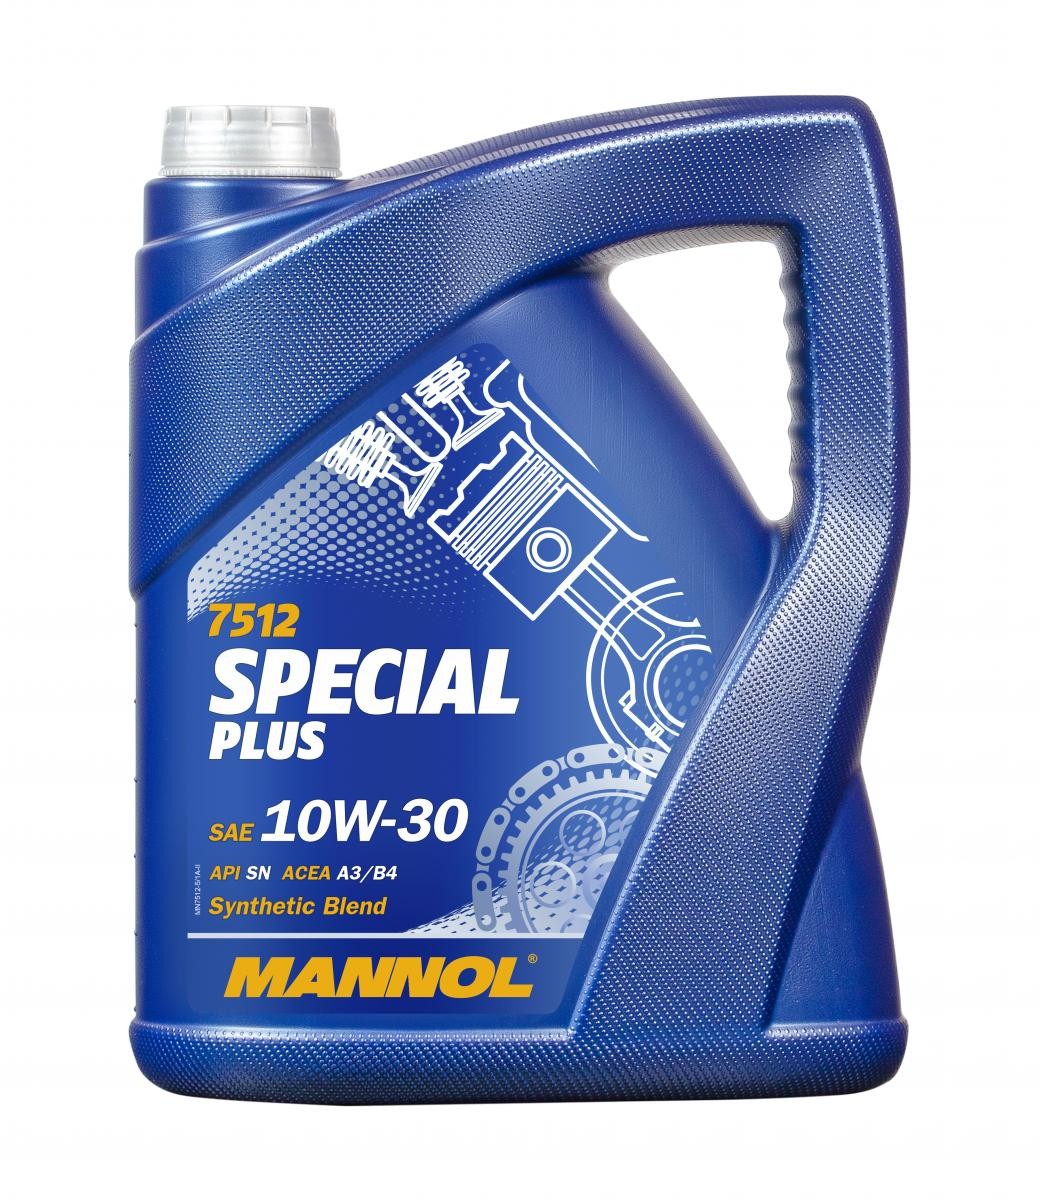 Engine oil MB 229.1 MANNOL - MN7512-5 SPECIAL PLUS